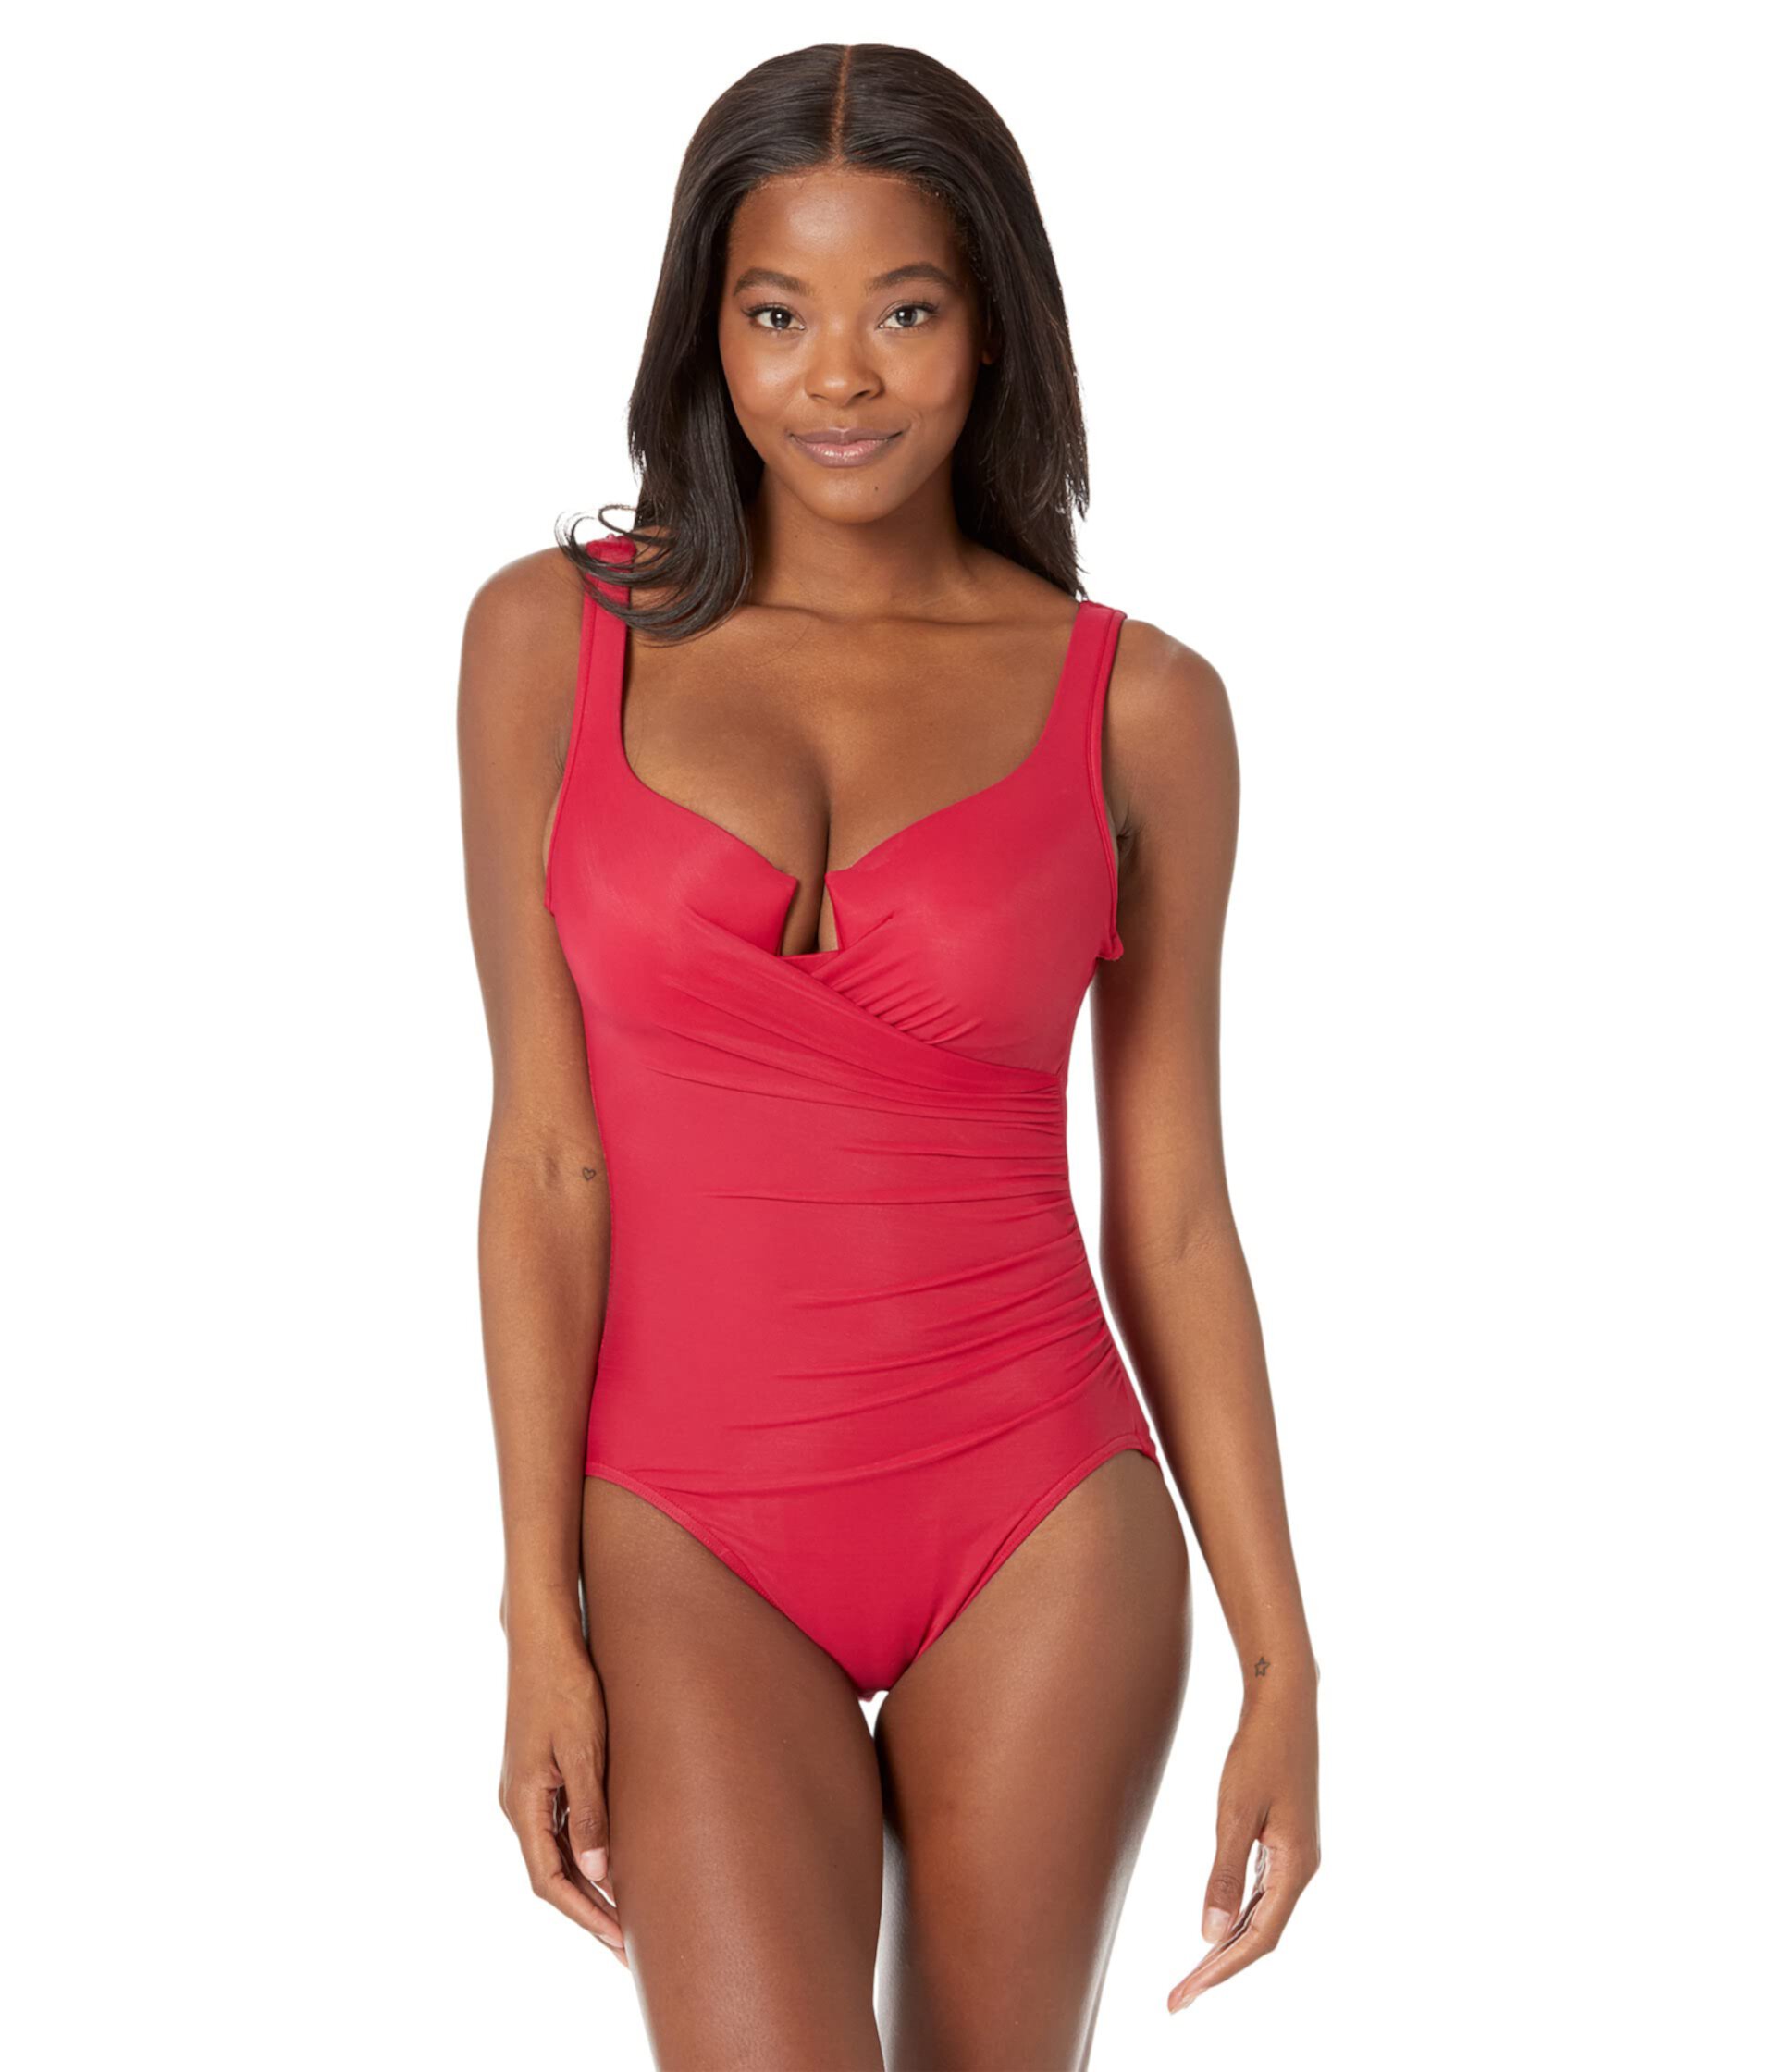 Must Have 19 Escape One-Piece Miraclesuit